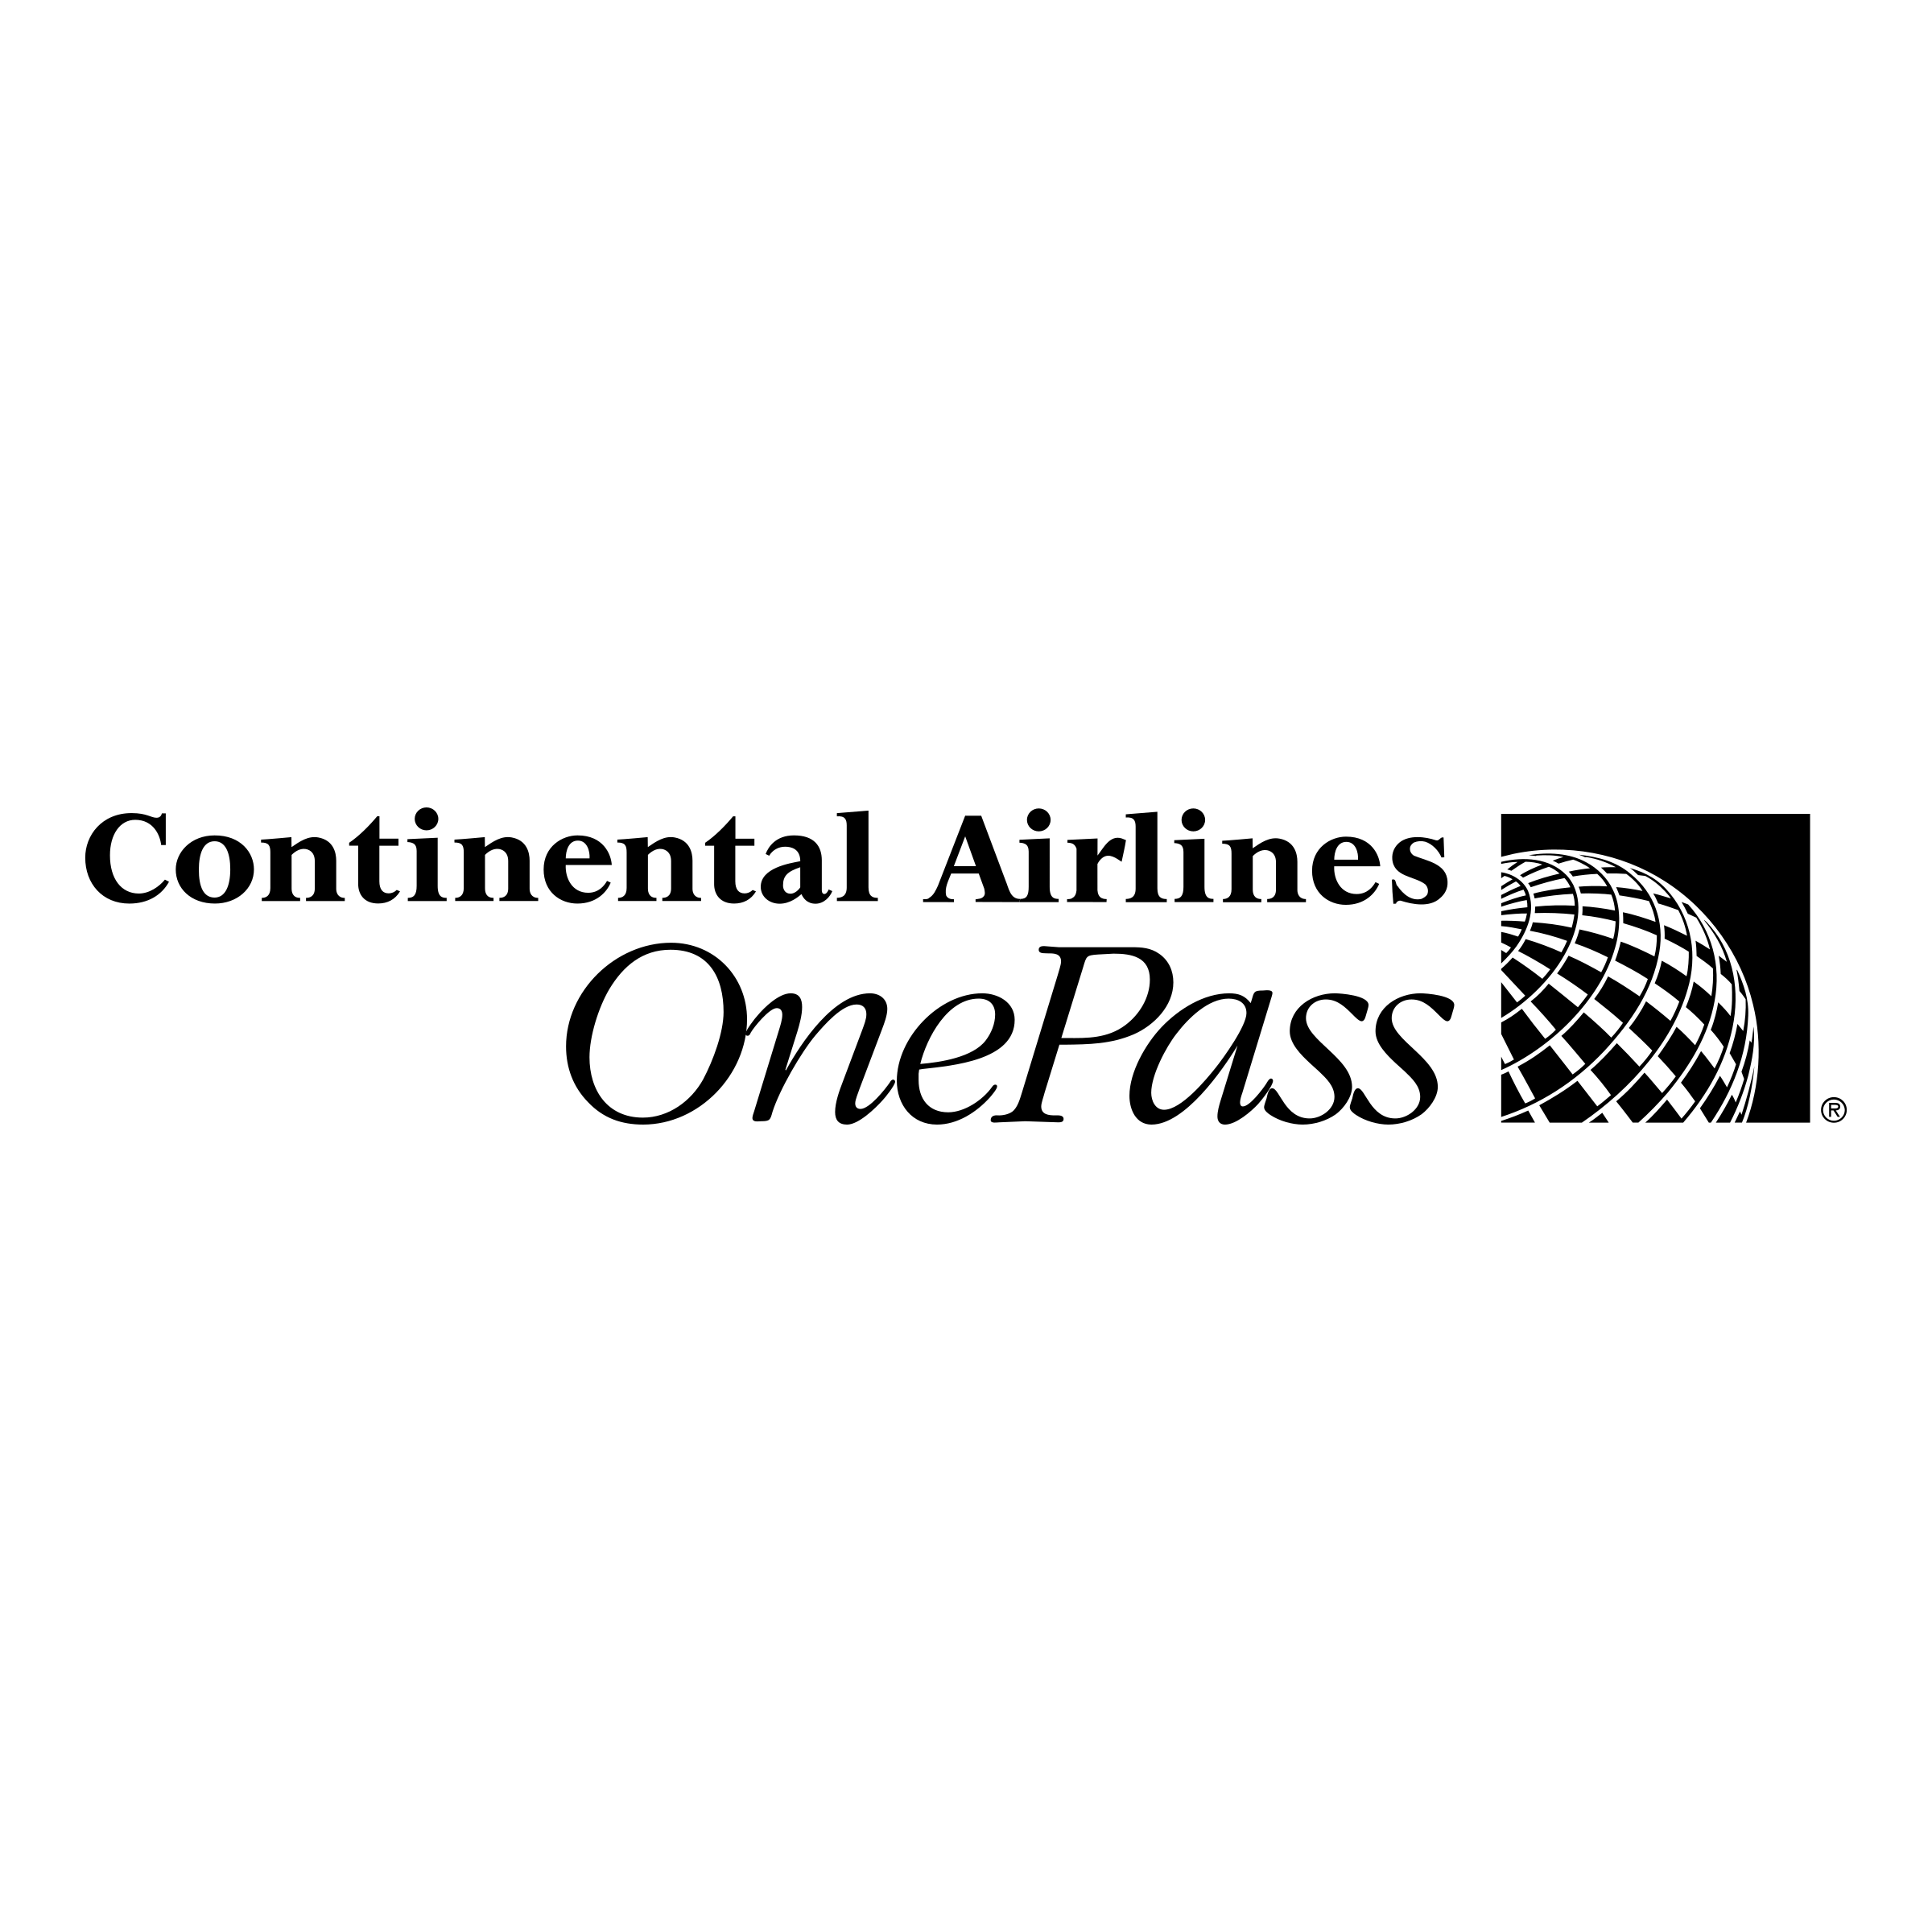 Continental Black Logo - Continental Airlines OnePass Logo PNG Transparent & SVG Vector